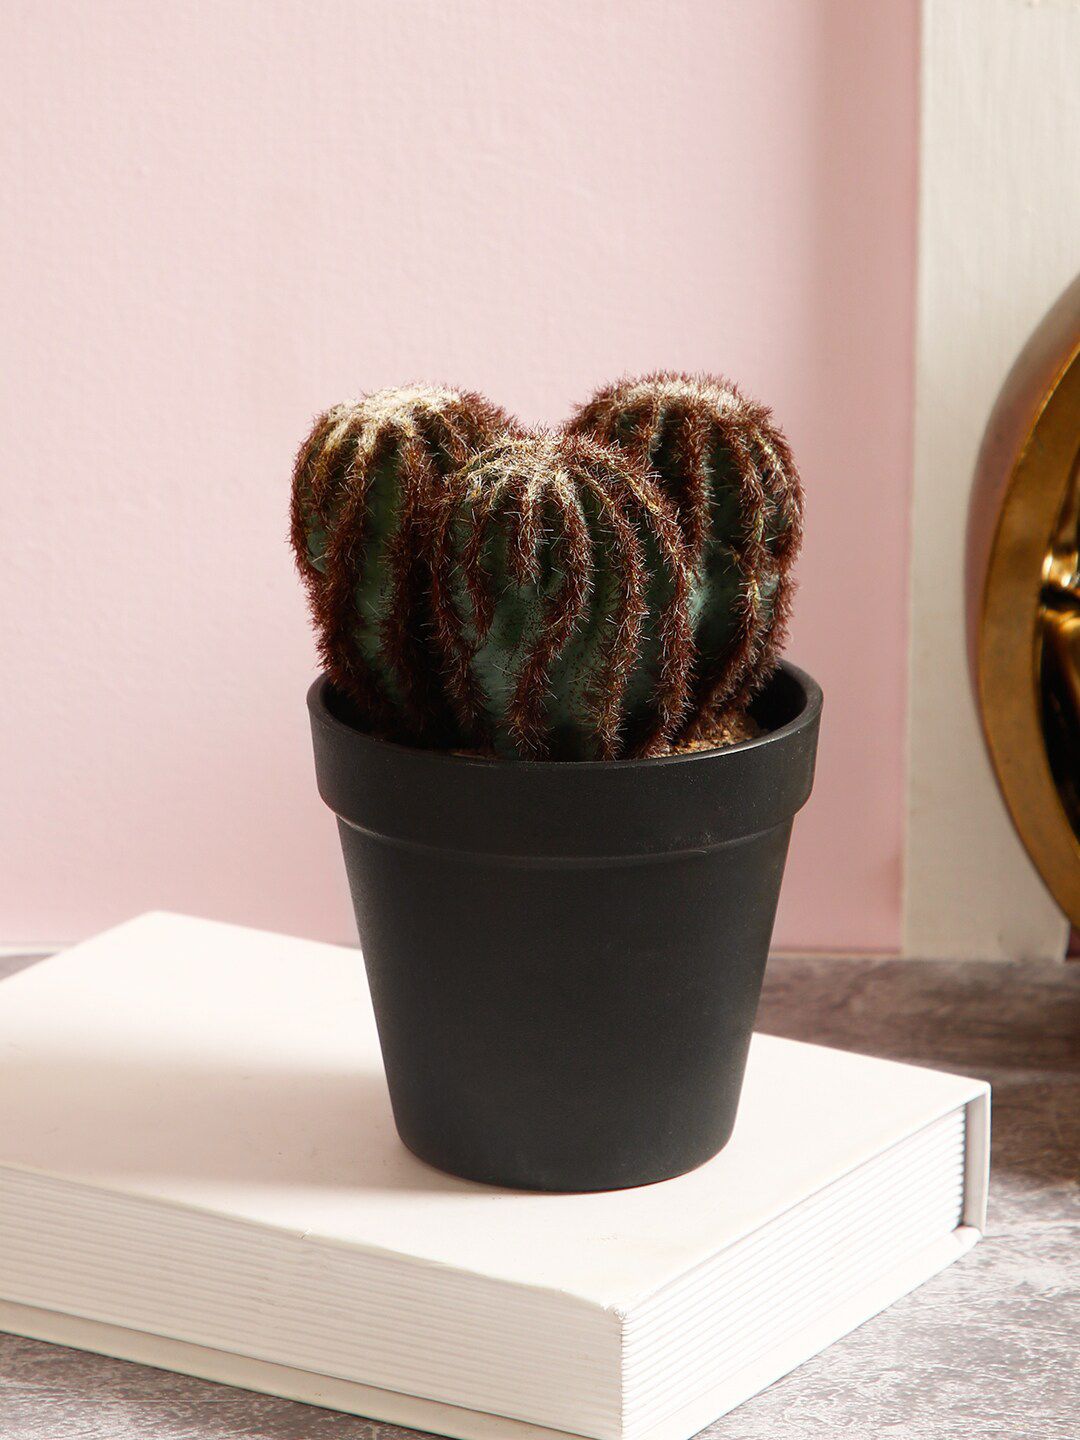 TAYHAA Green & Brown Artificial Cactus Plant With Pot Price in India